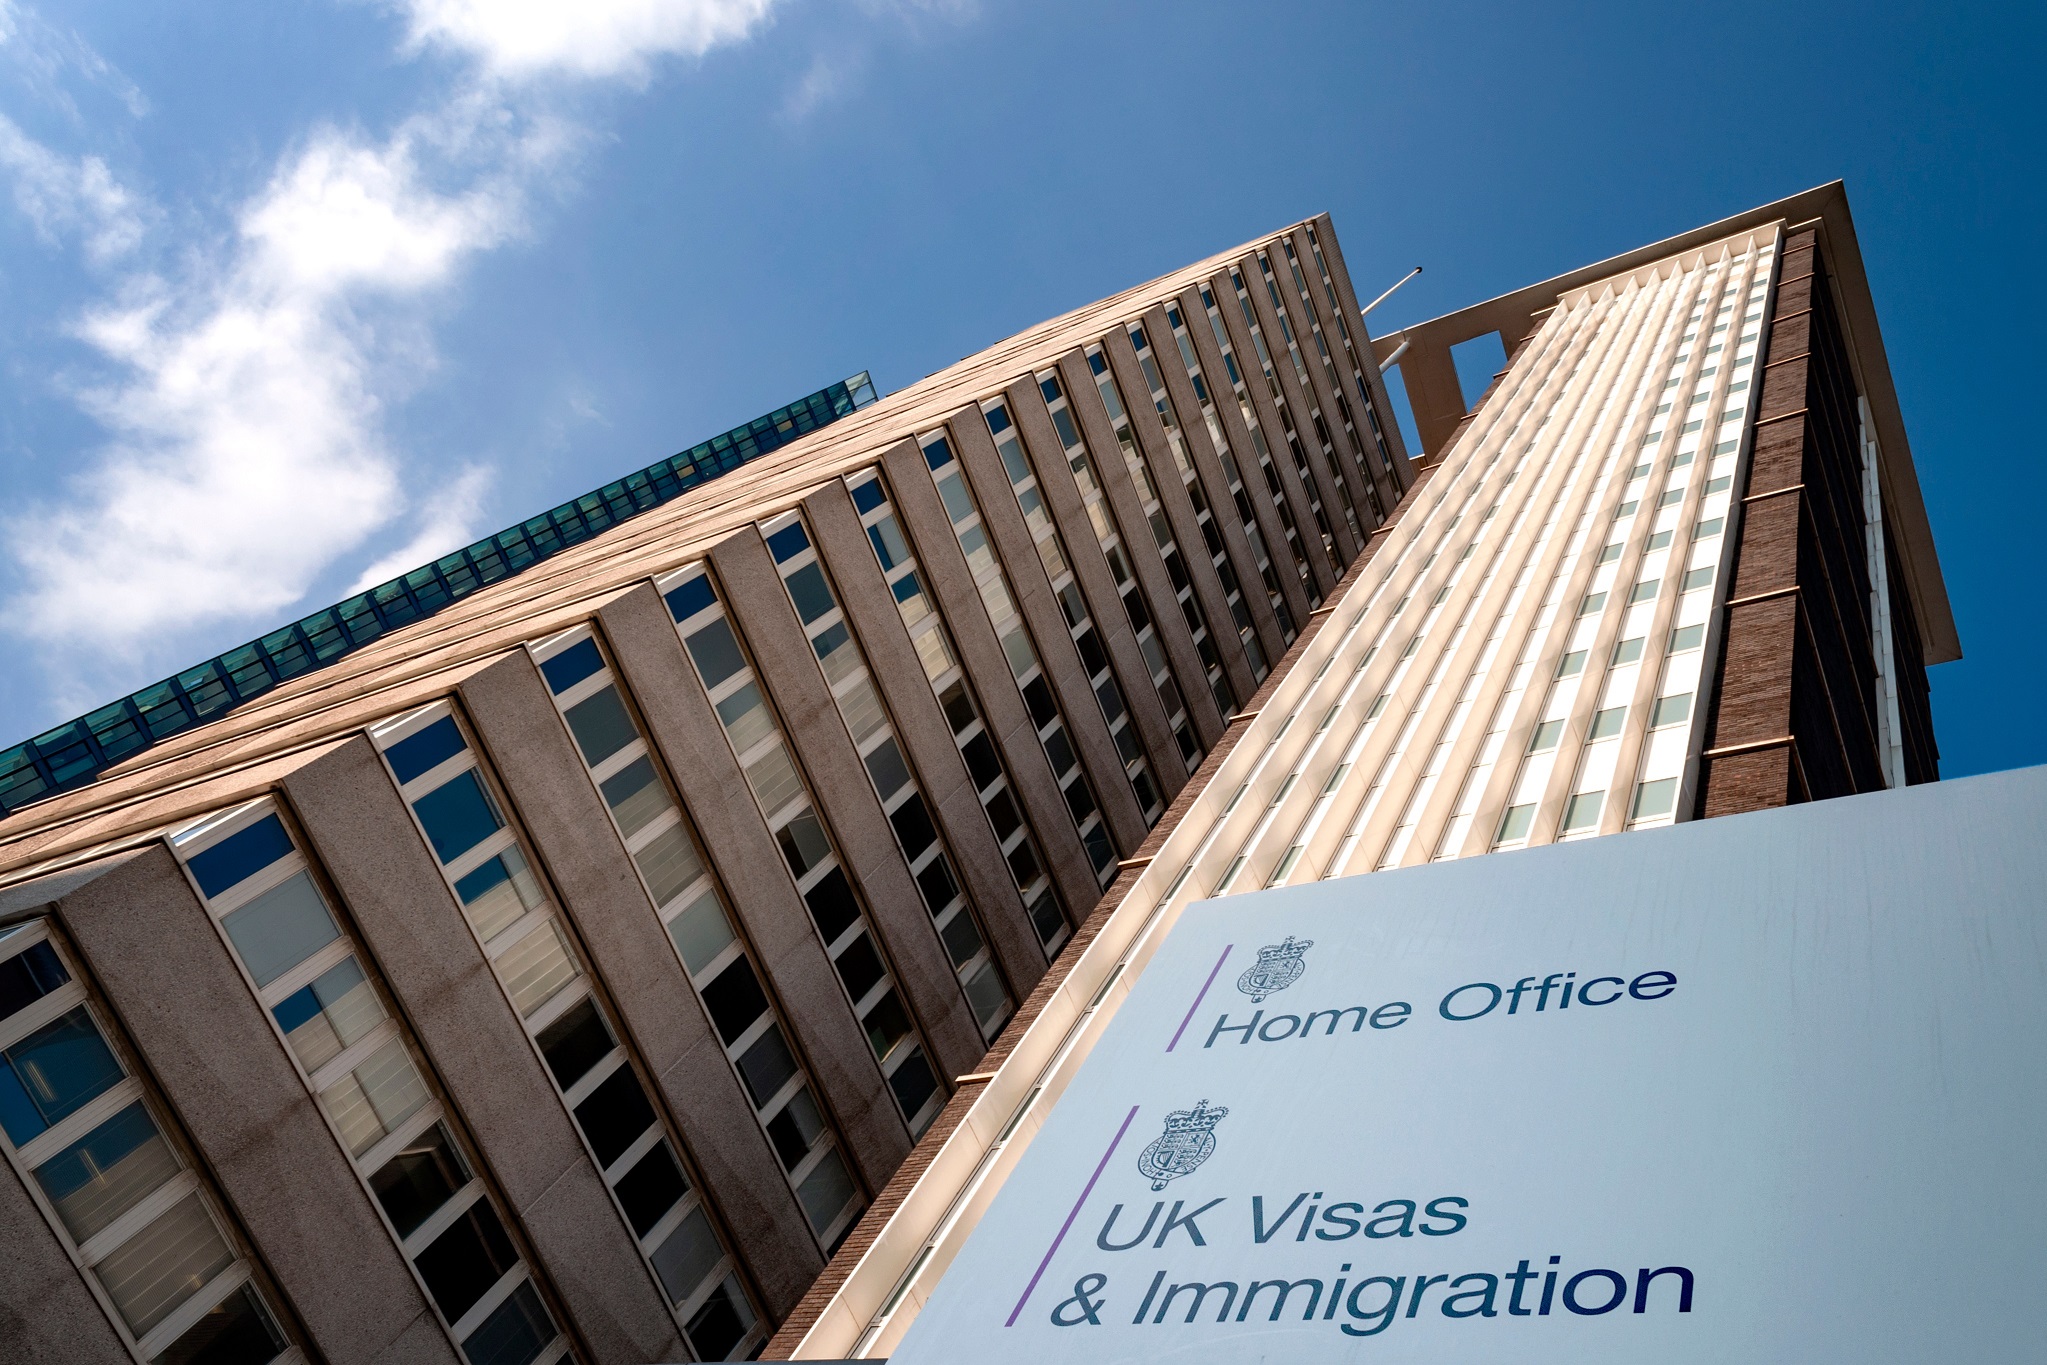 Ask for an administrative review if your UK visa is refused